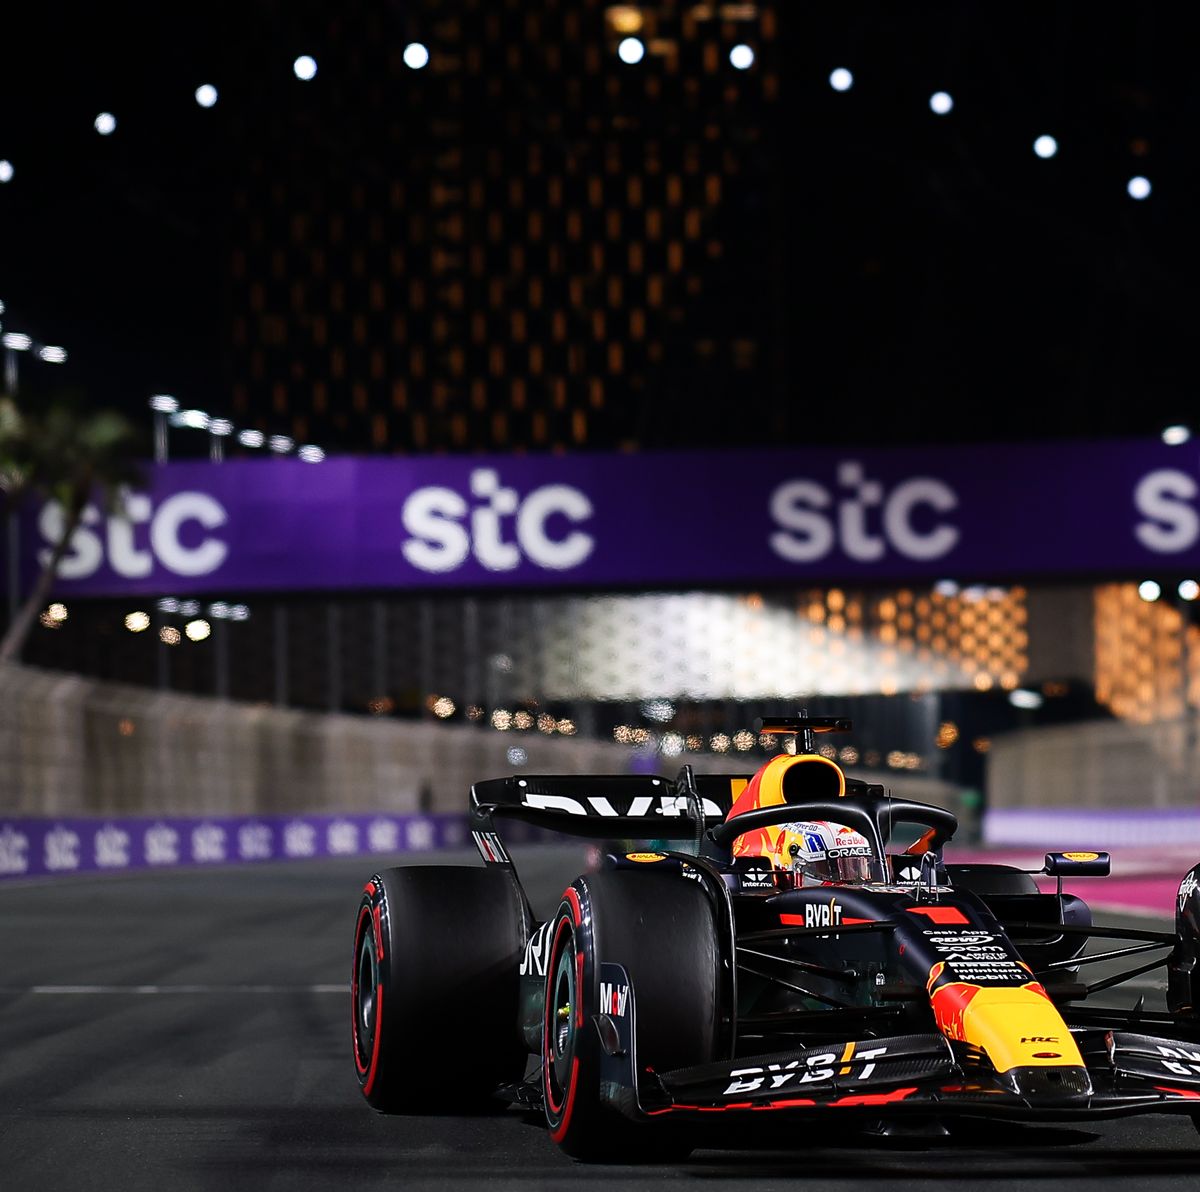 This is how the F1 World Championship is going: The fastest car isn't  dominating